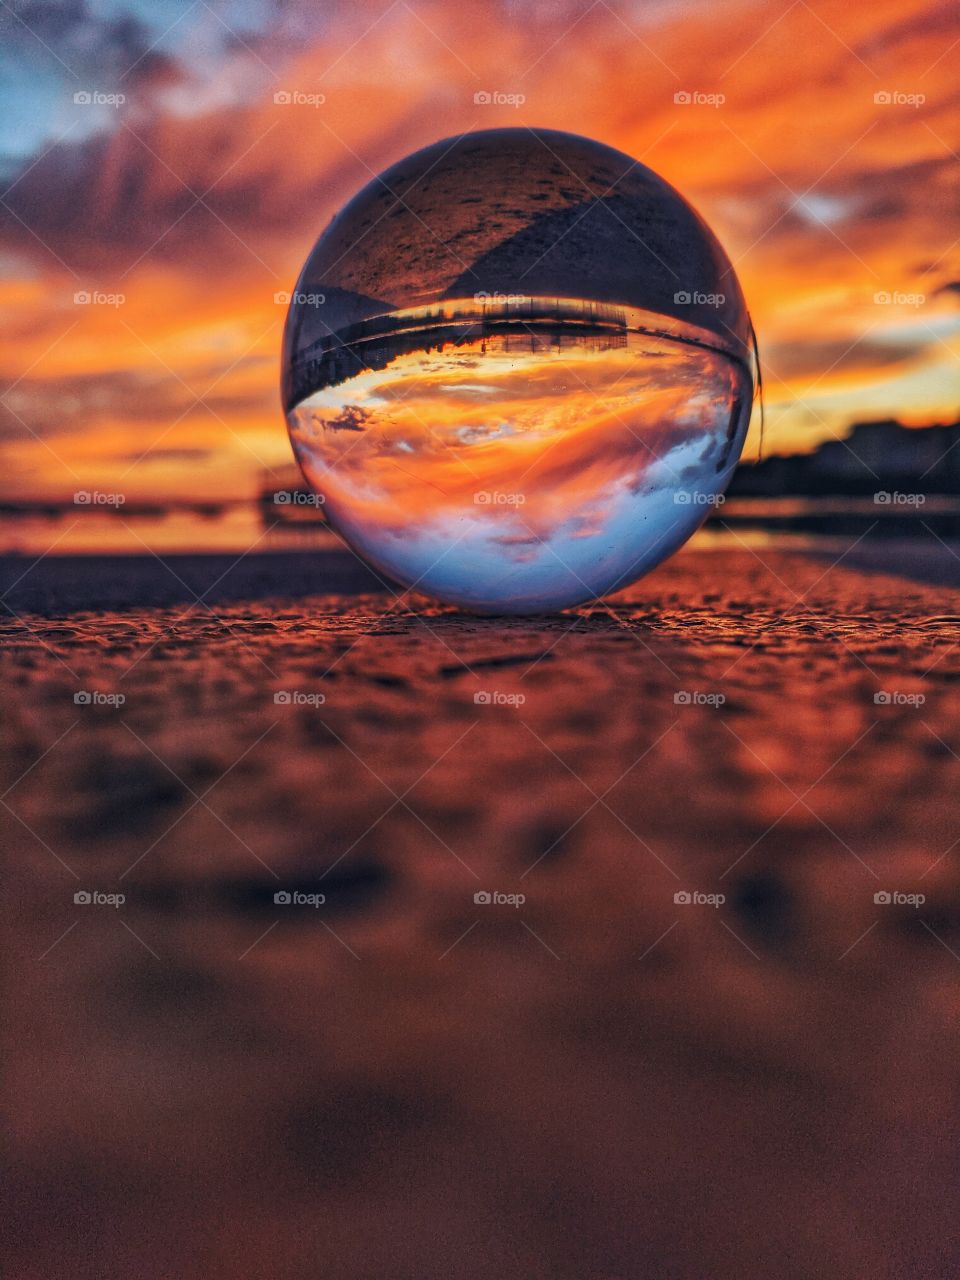 Beautiful reflection of the bright red sunset sky in lens ball or crystal ball close up. Summer vacation time.